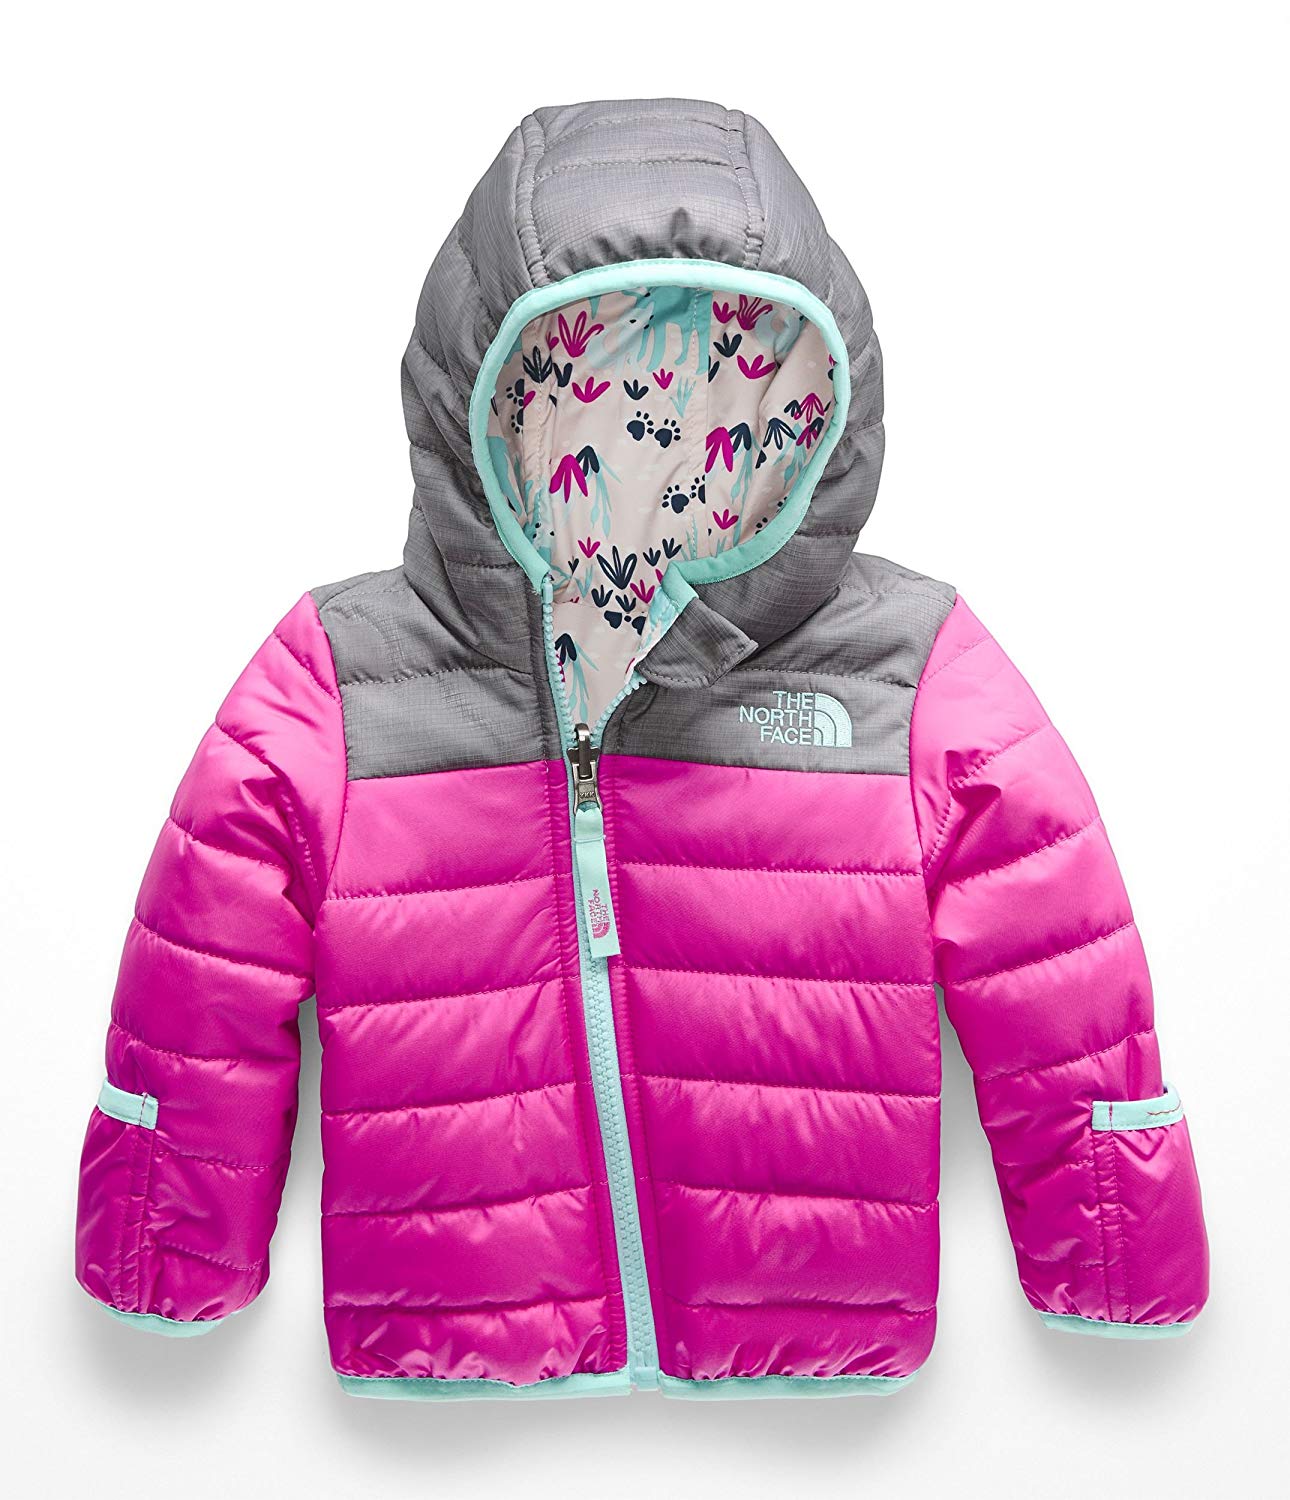 The North Face Toddler Girls 